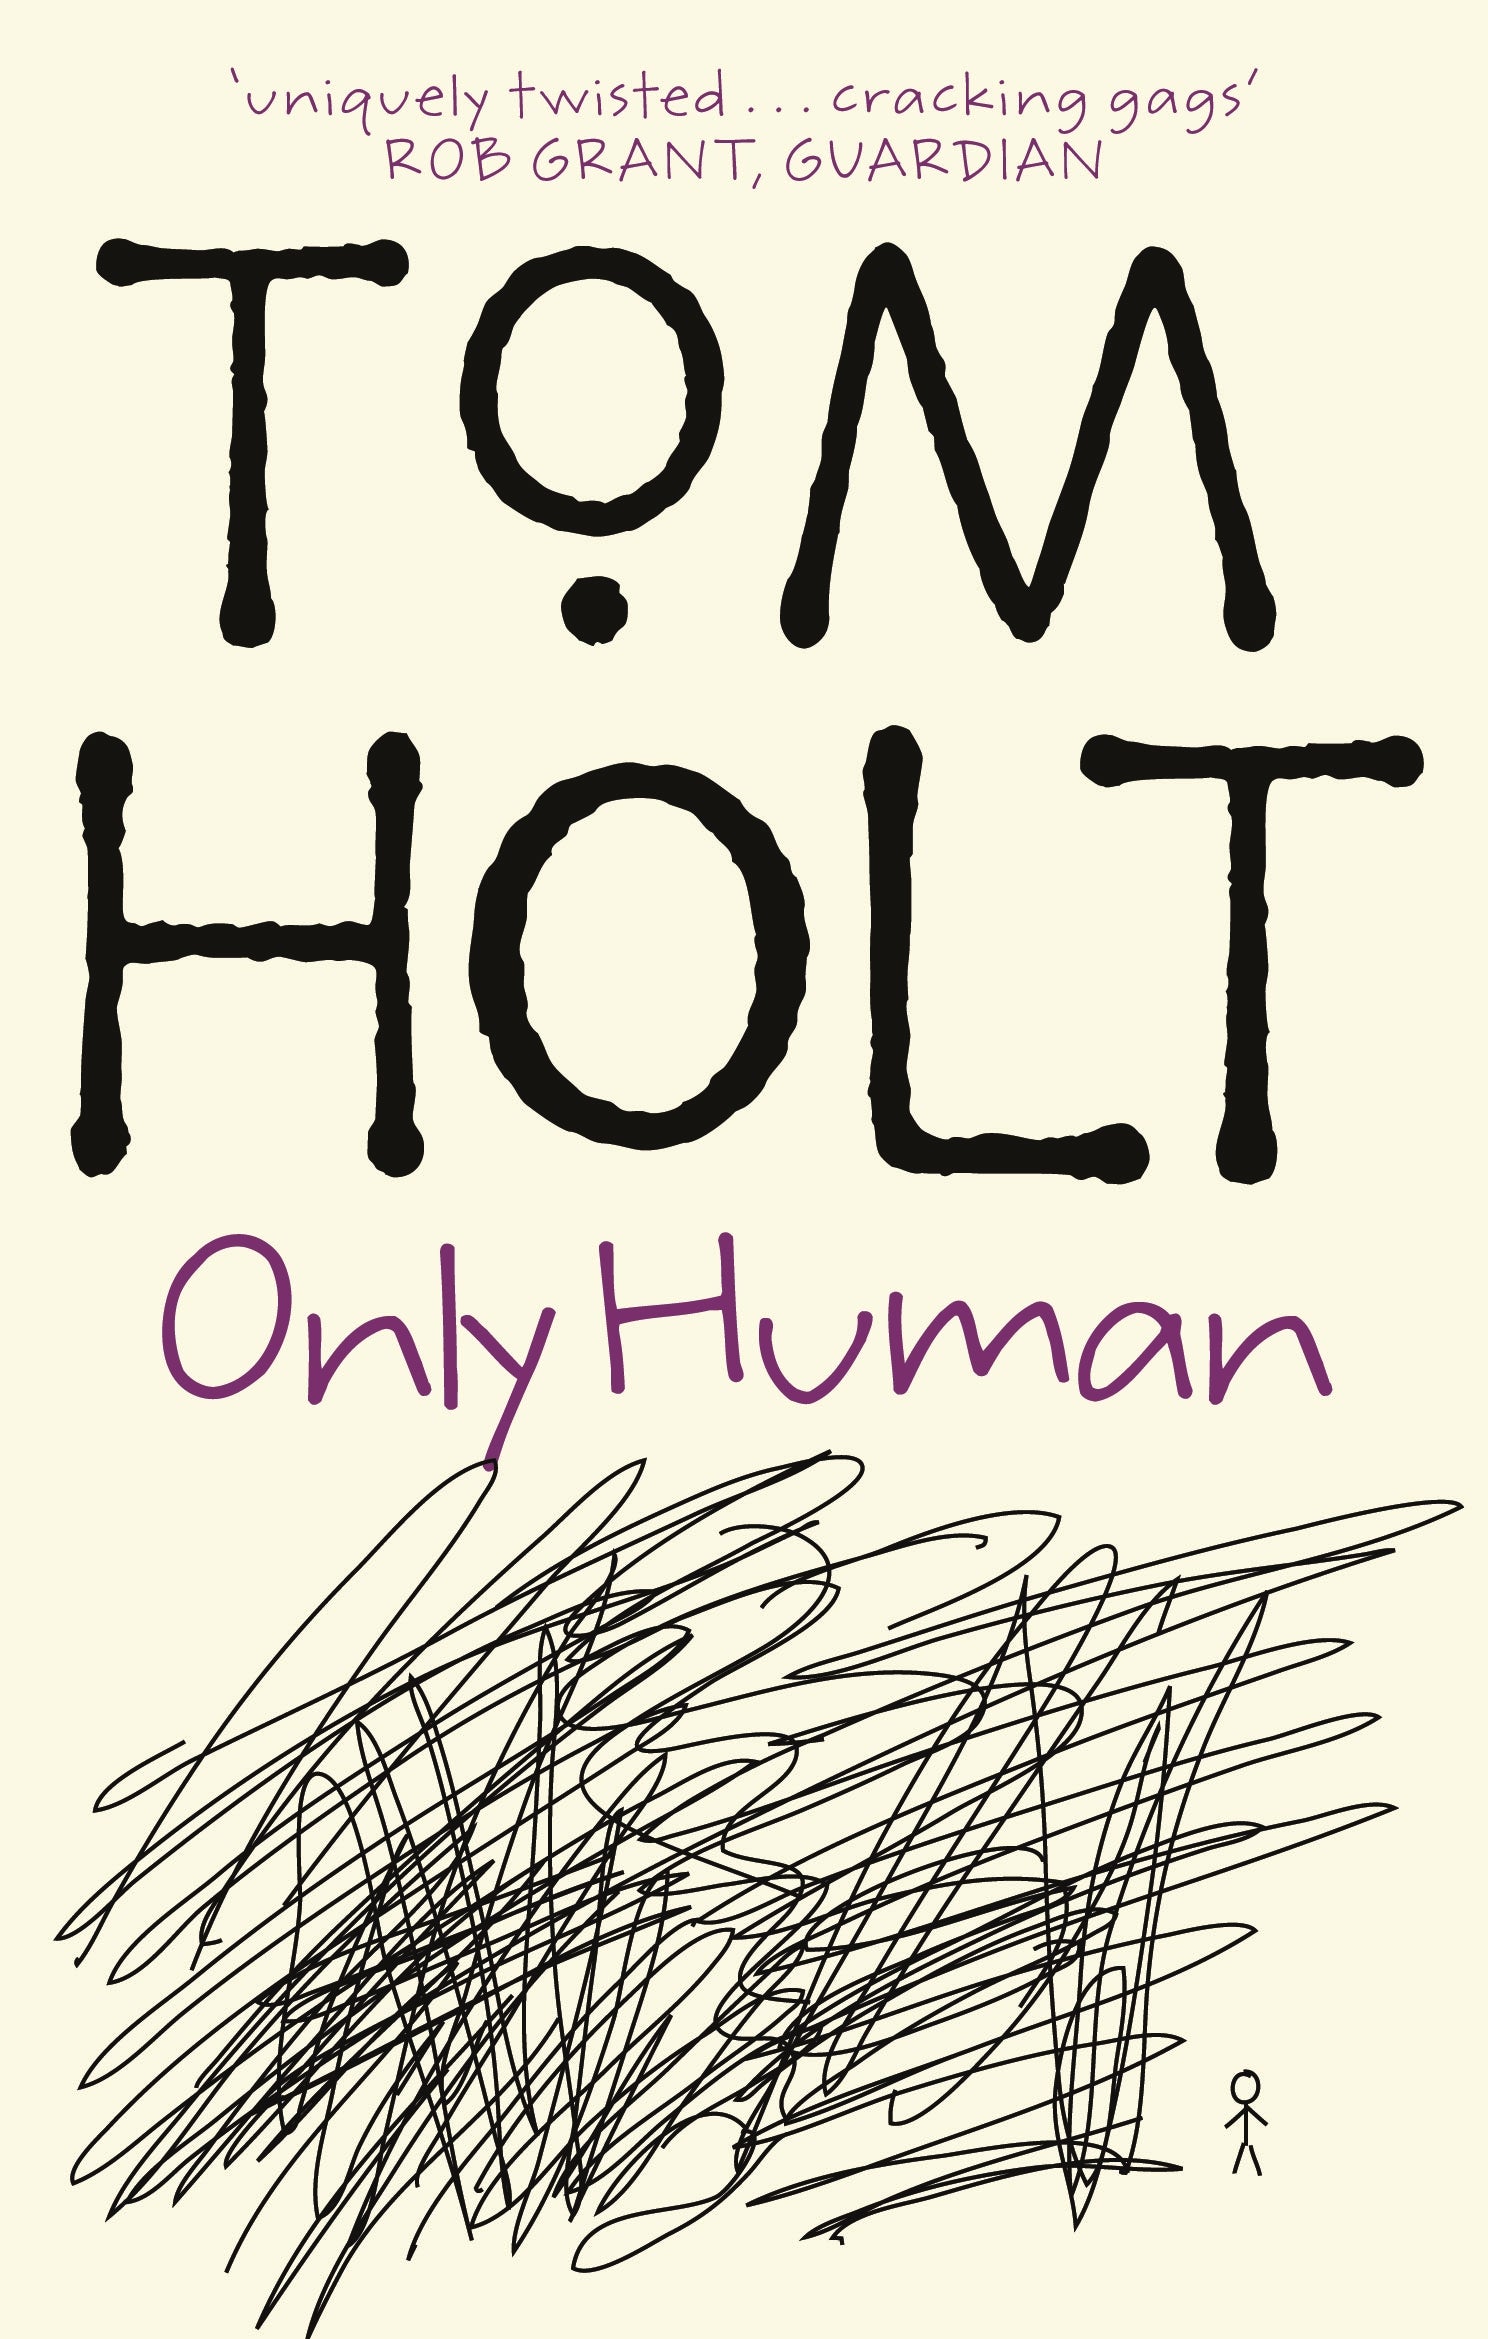 Only Human by Tom Holt